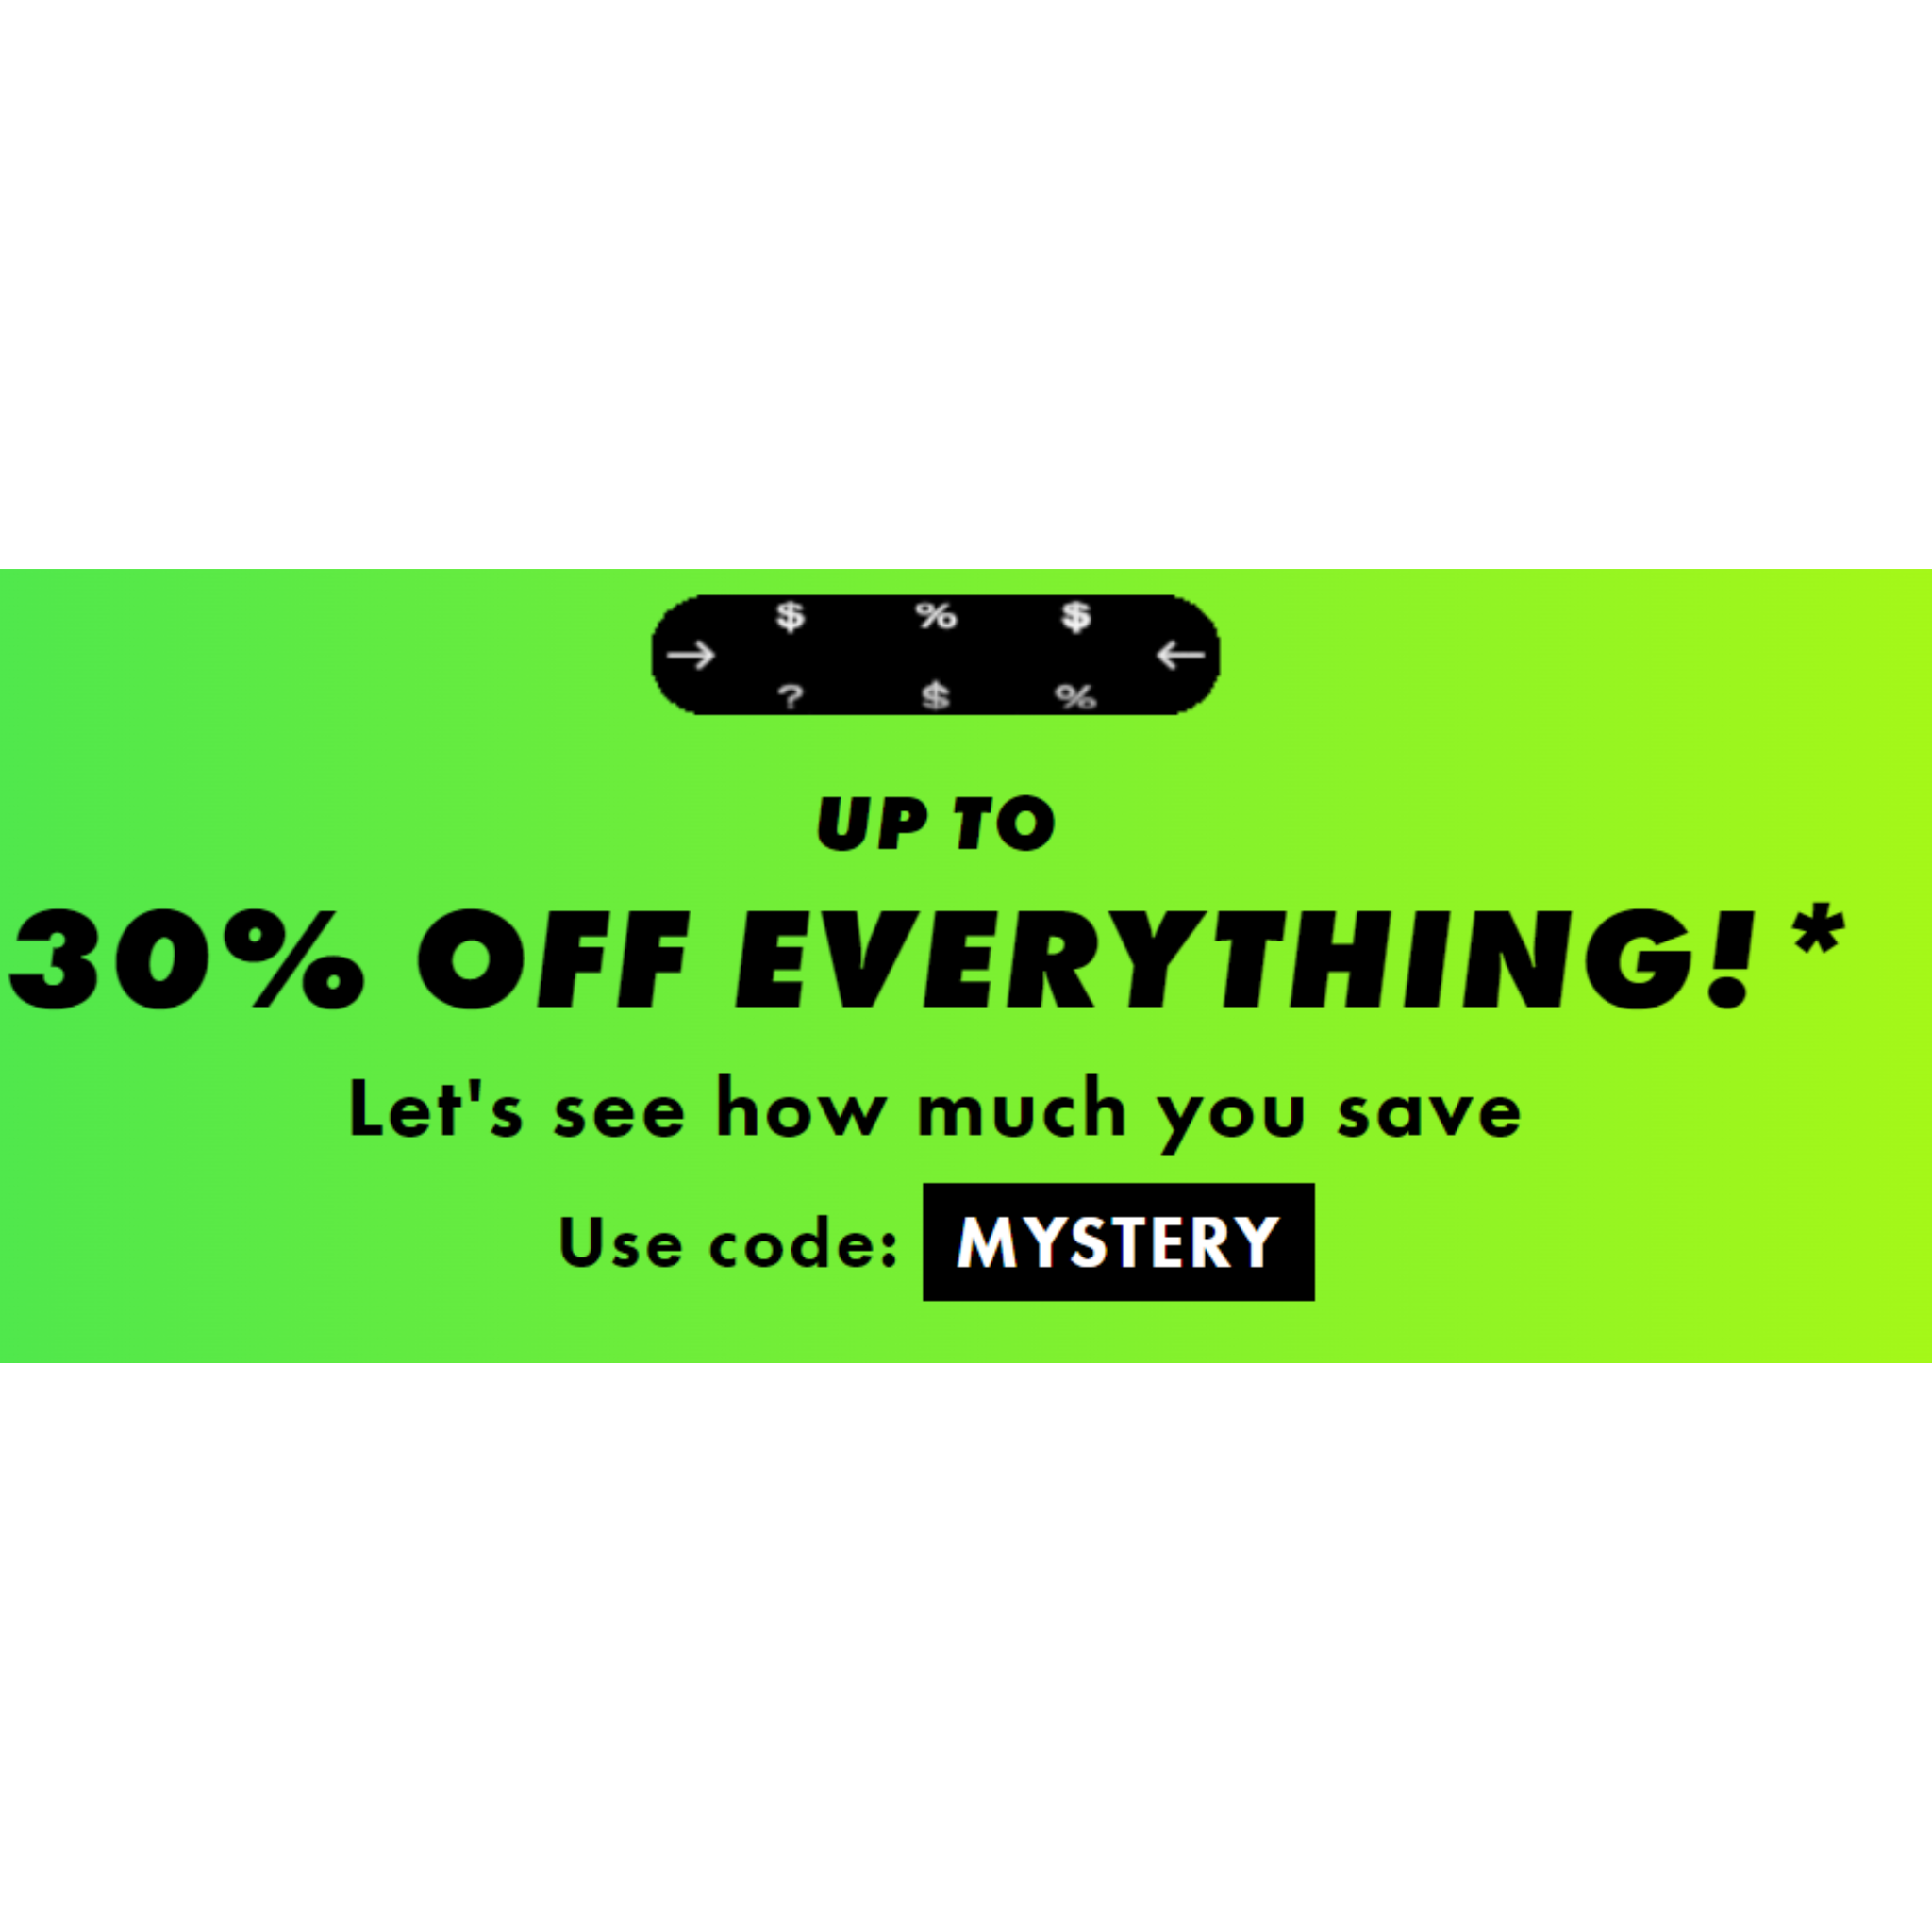 ASOS up to 30% OFF EVERYTHING!